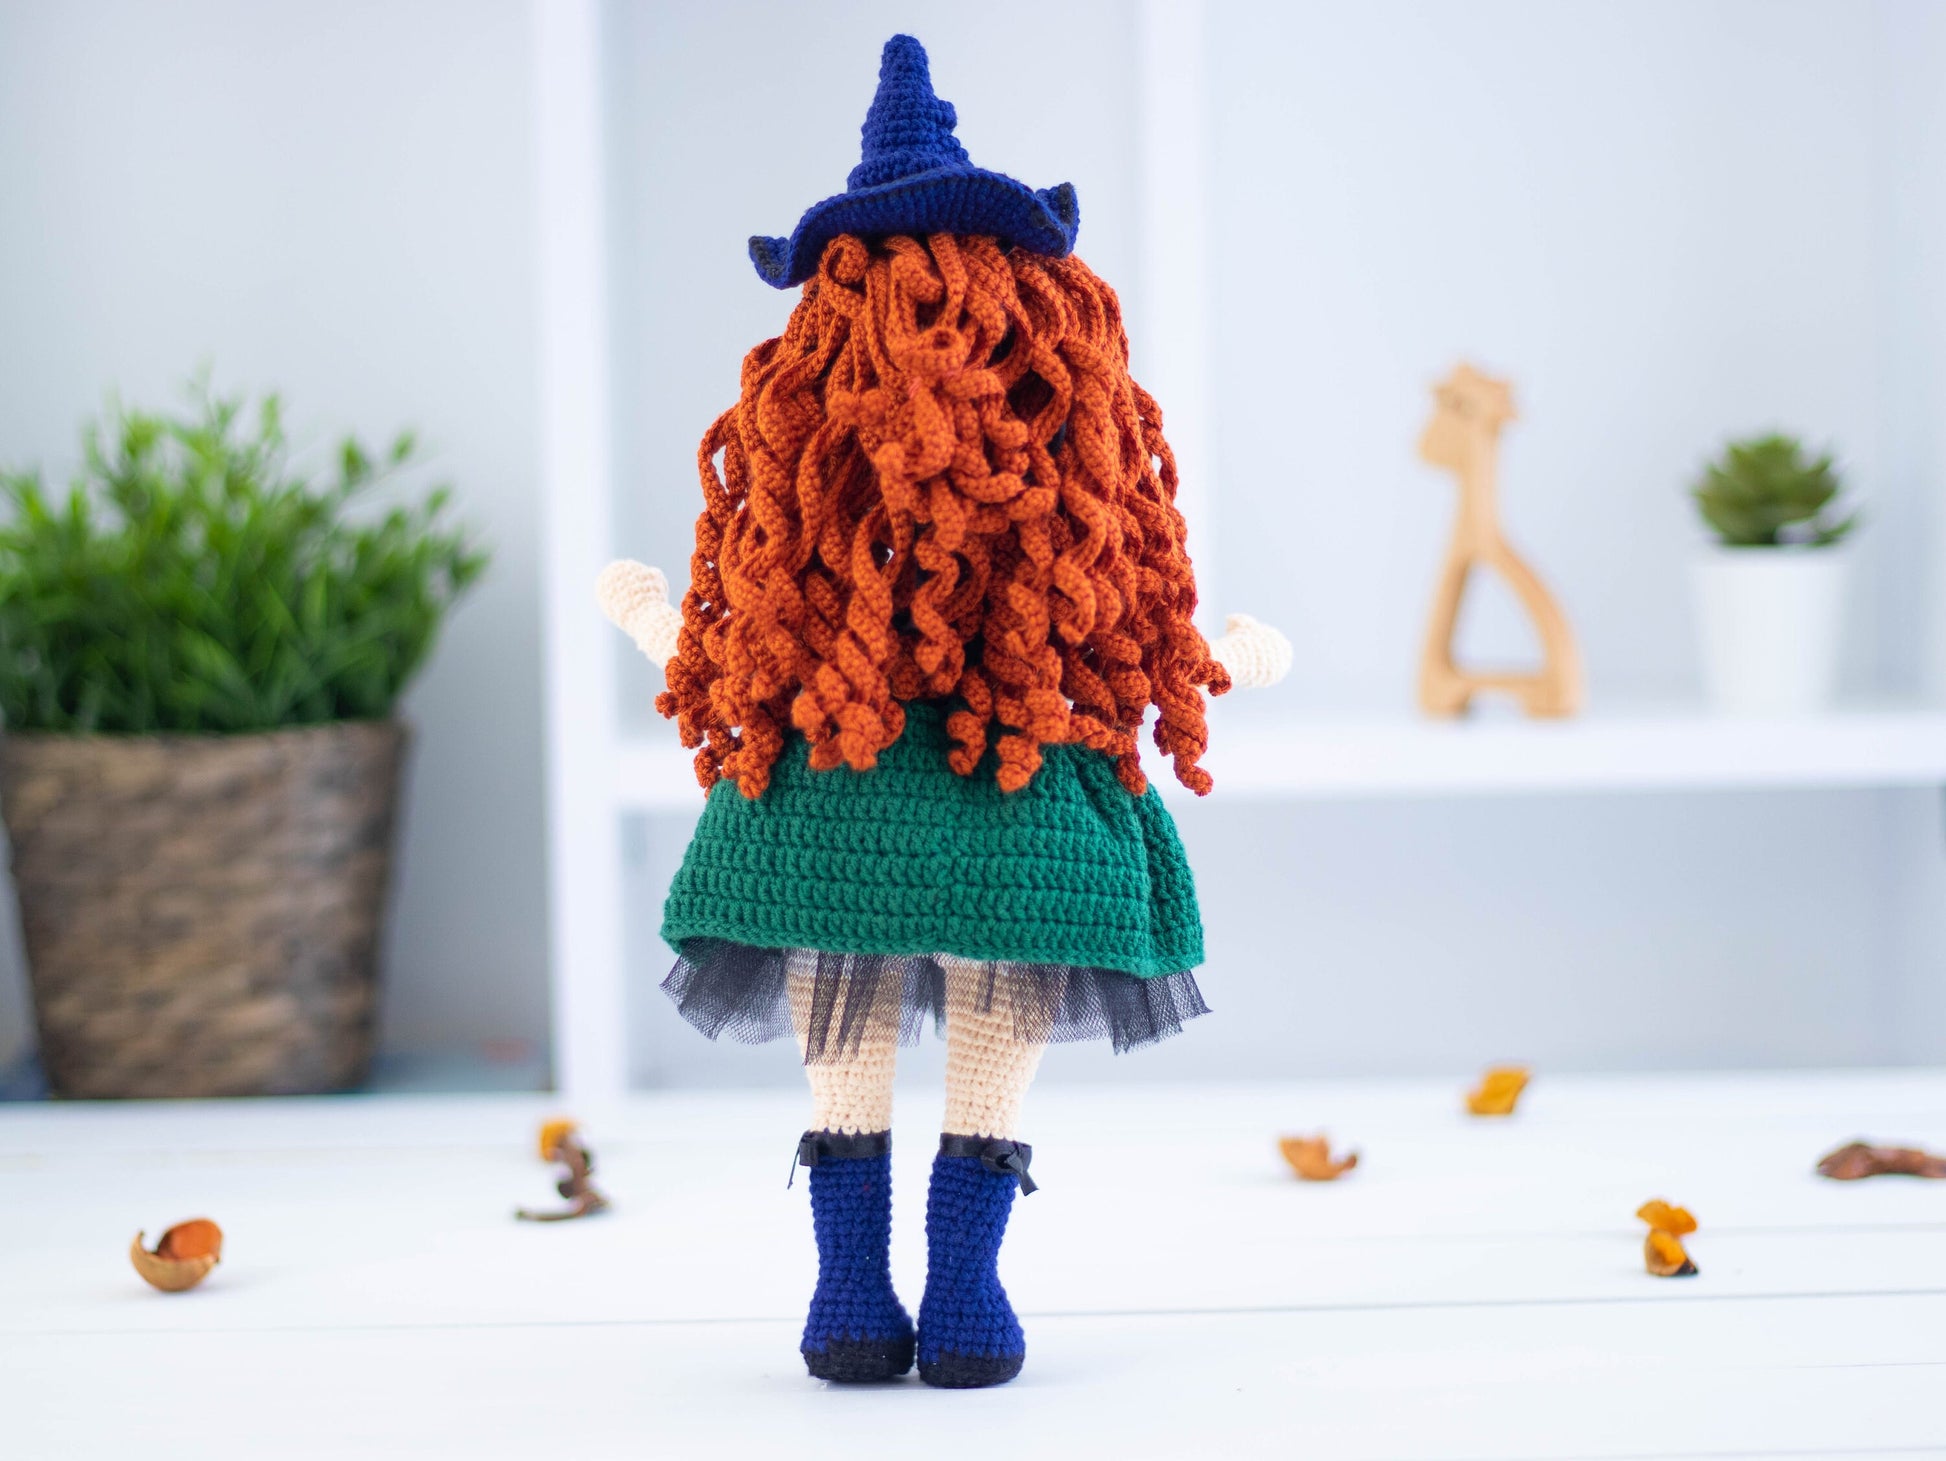 Witch Doll, Halloween Witch Doll, Halloween Crochet, Halloween Doll, Halloween Plush, Halloween Decor Indoor, Witch Toy, Cute Crochet Doll